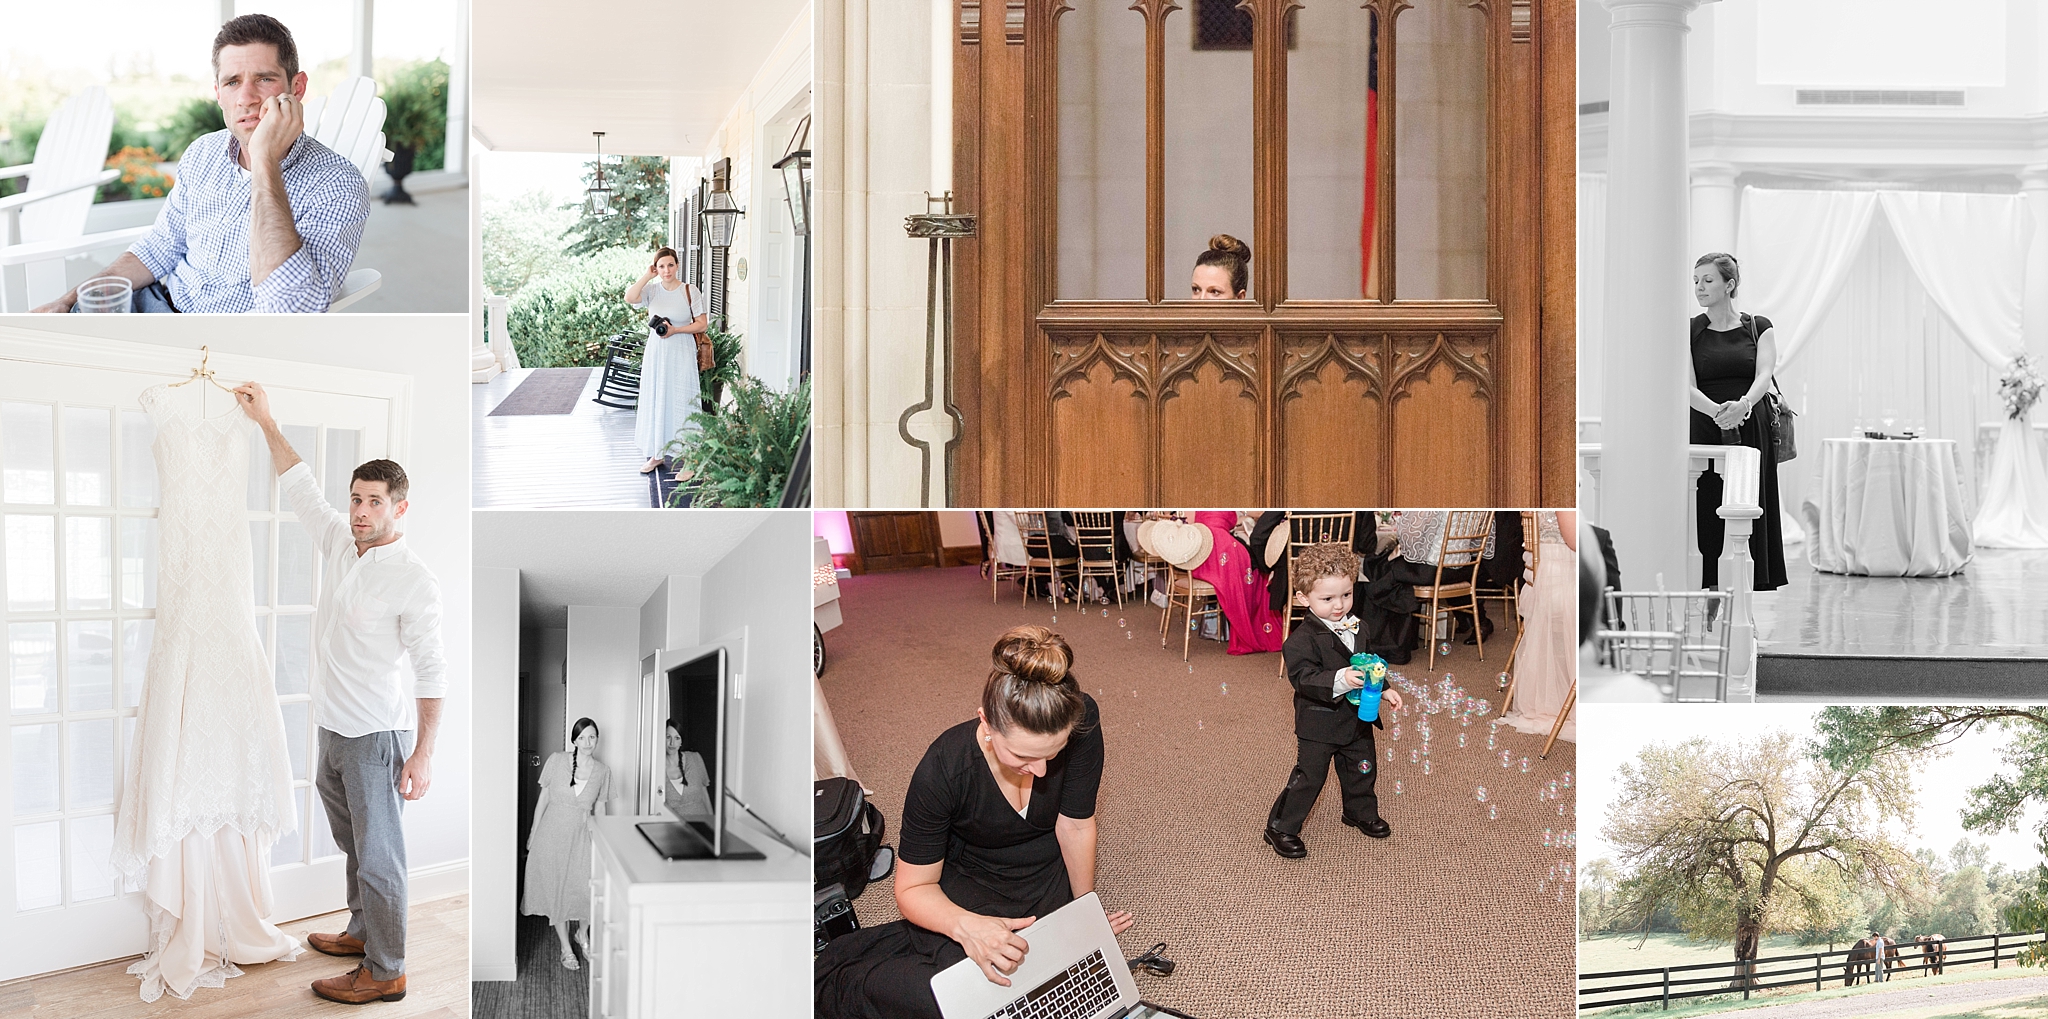 Go behind the scenes during the epic 2017 season with this Washington, DC wedding photographer to see all the fun that takes place on a client's big day!